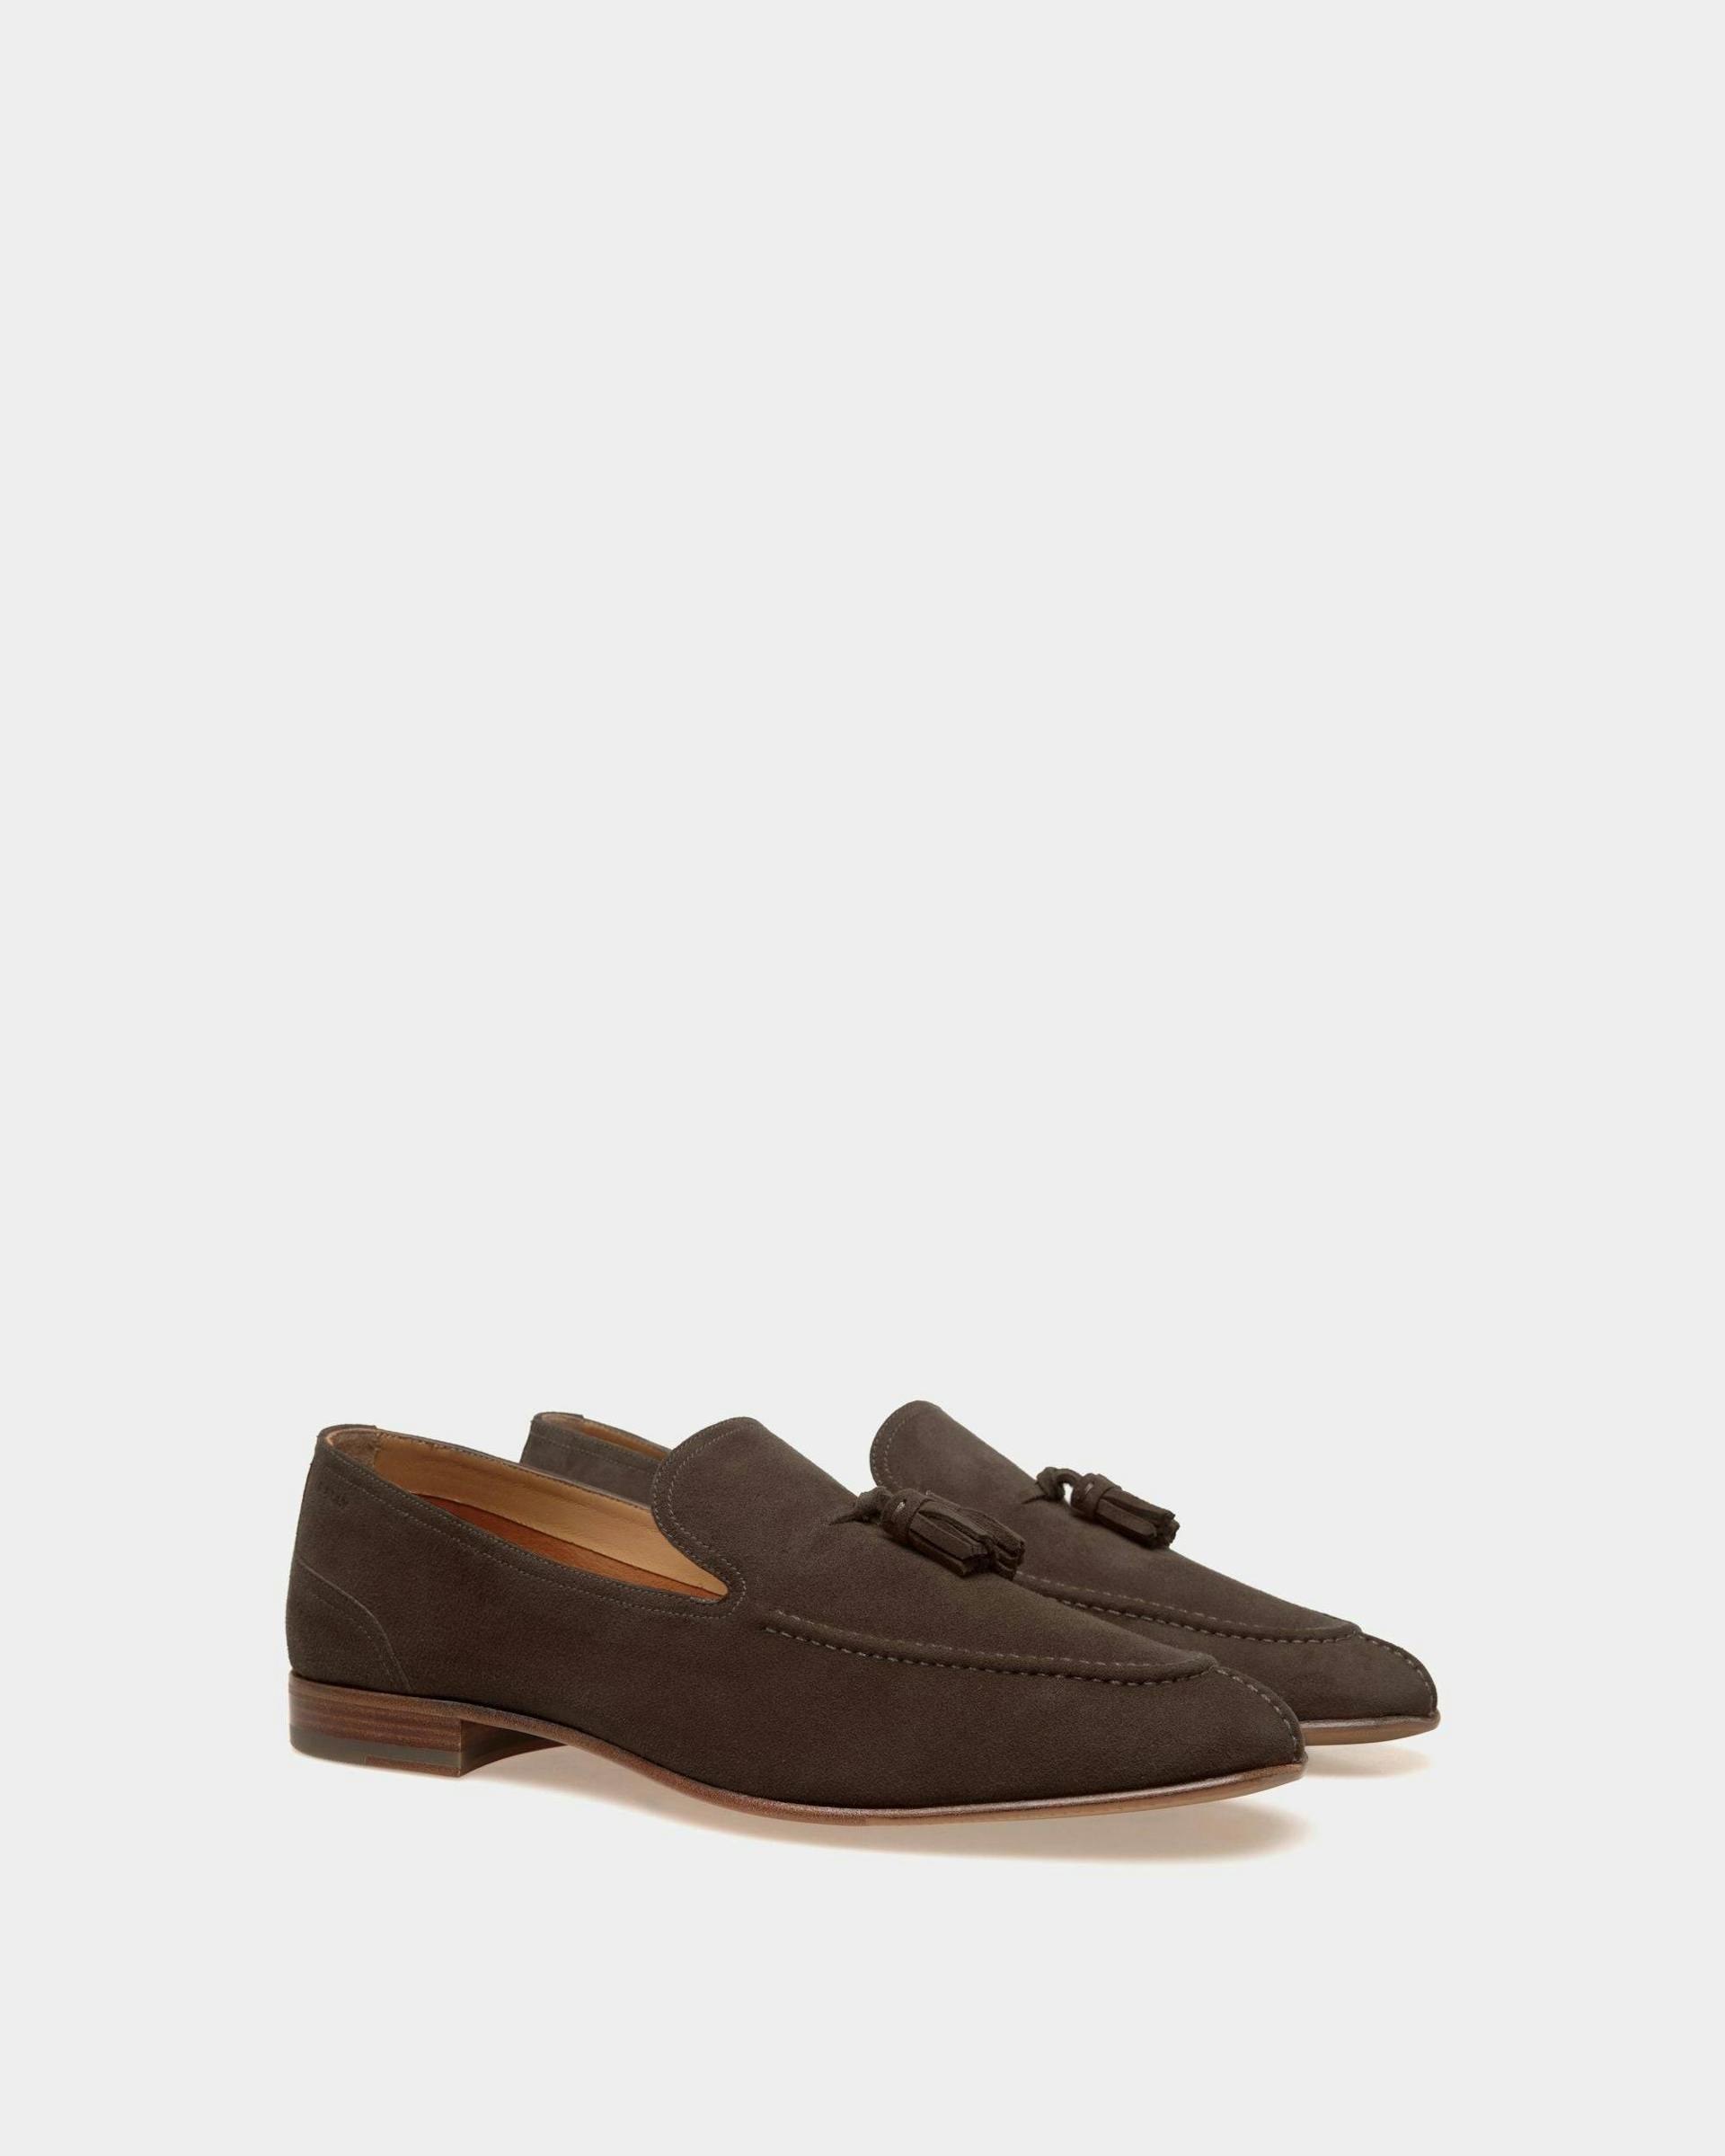 Men's Suisse Loafer in Suede | Bally | Still Life 3/4 Front